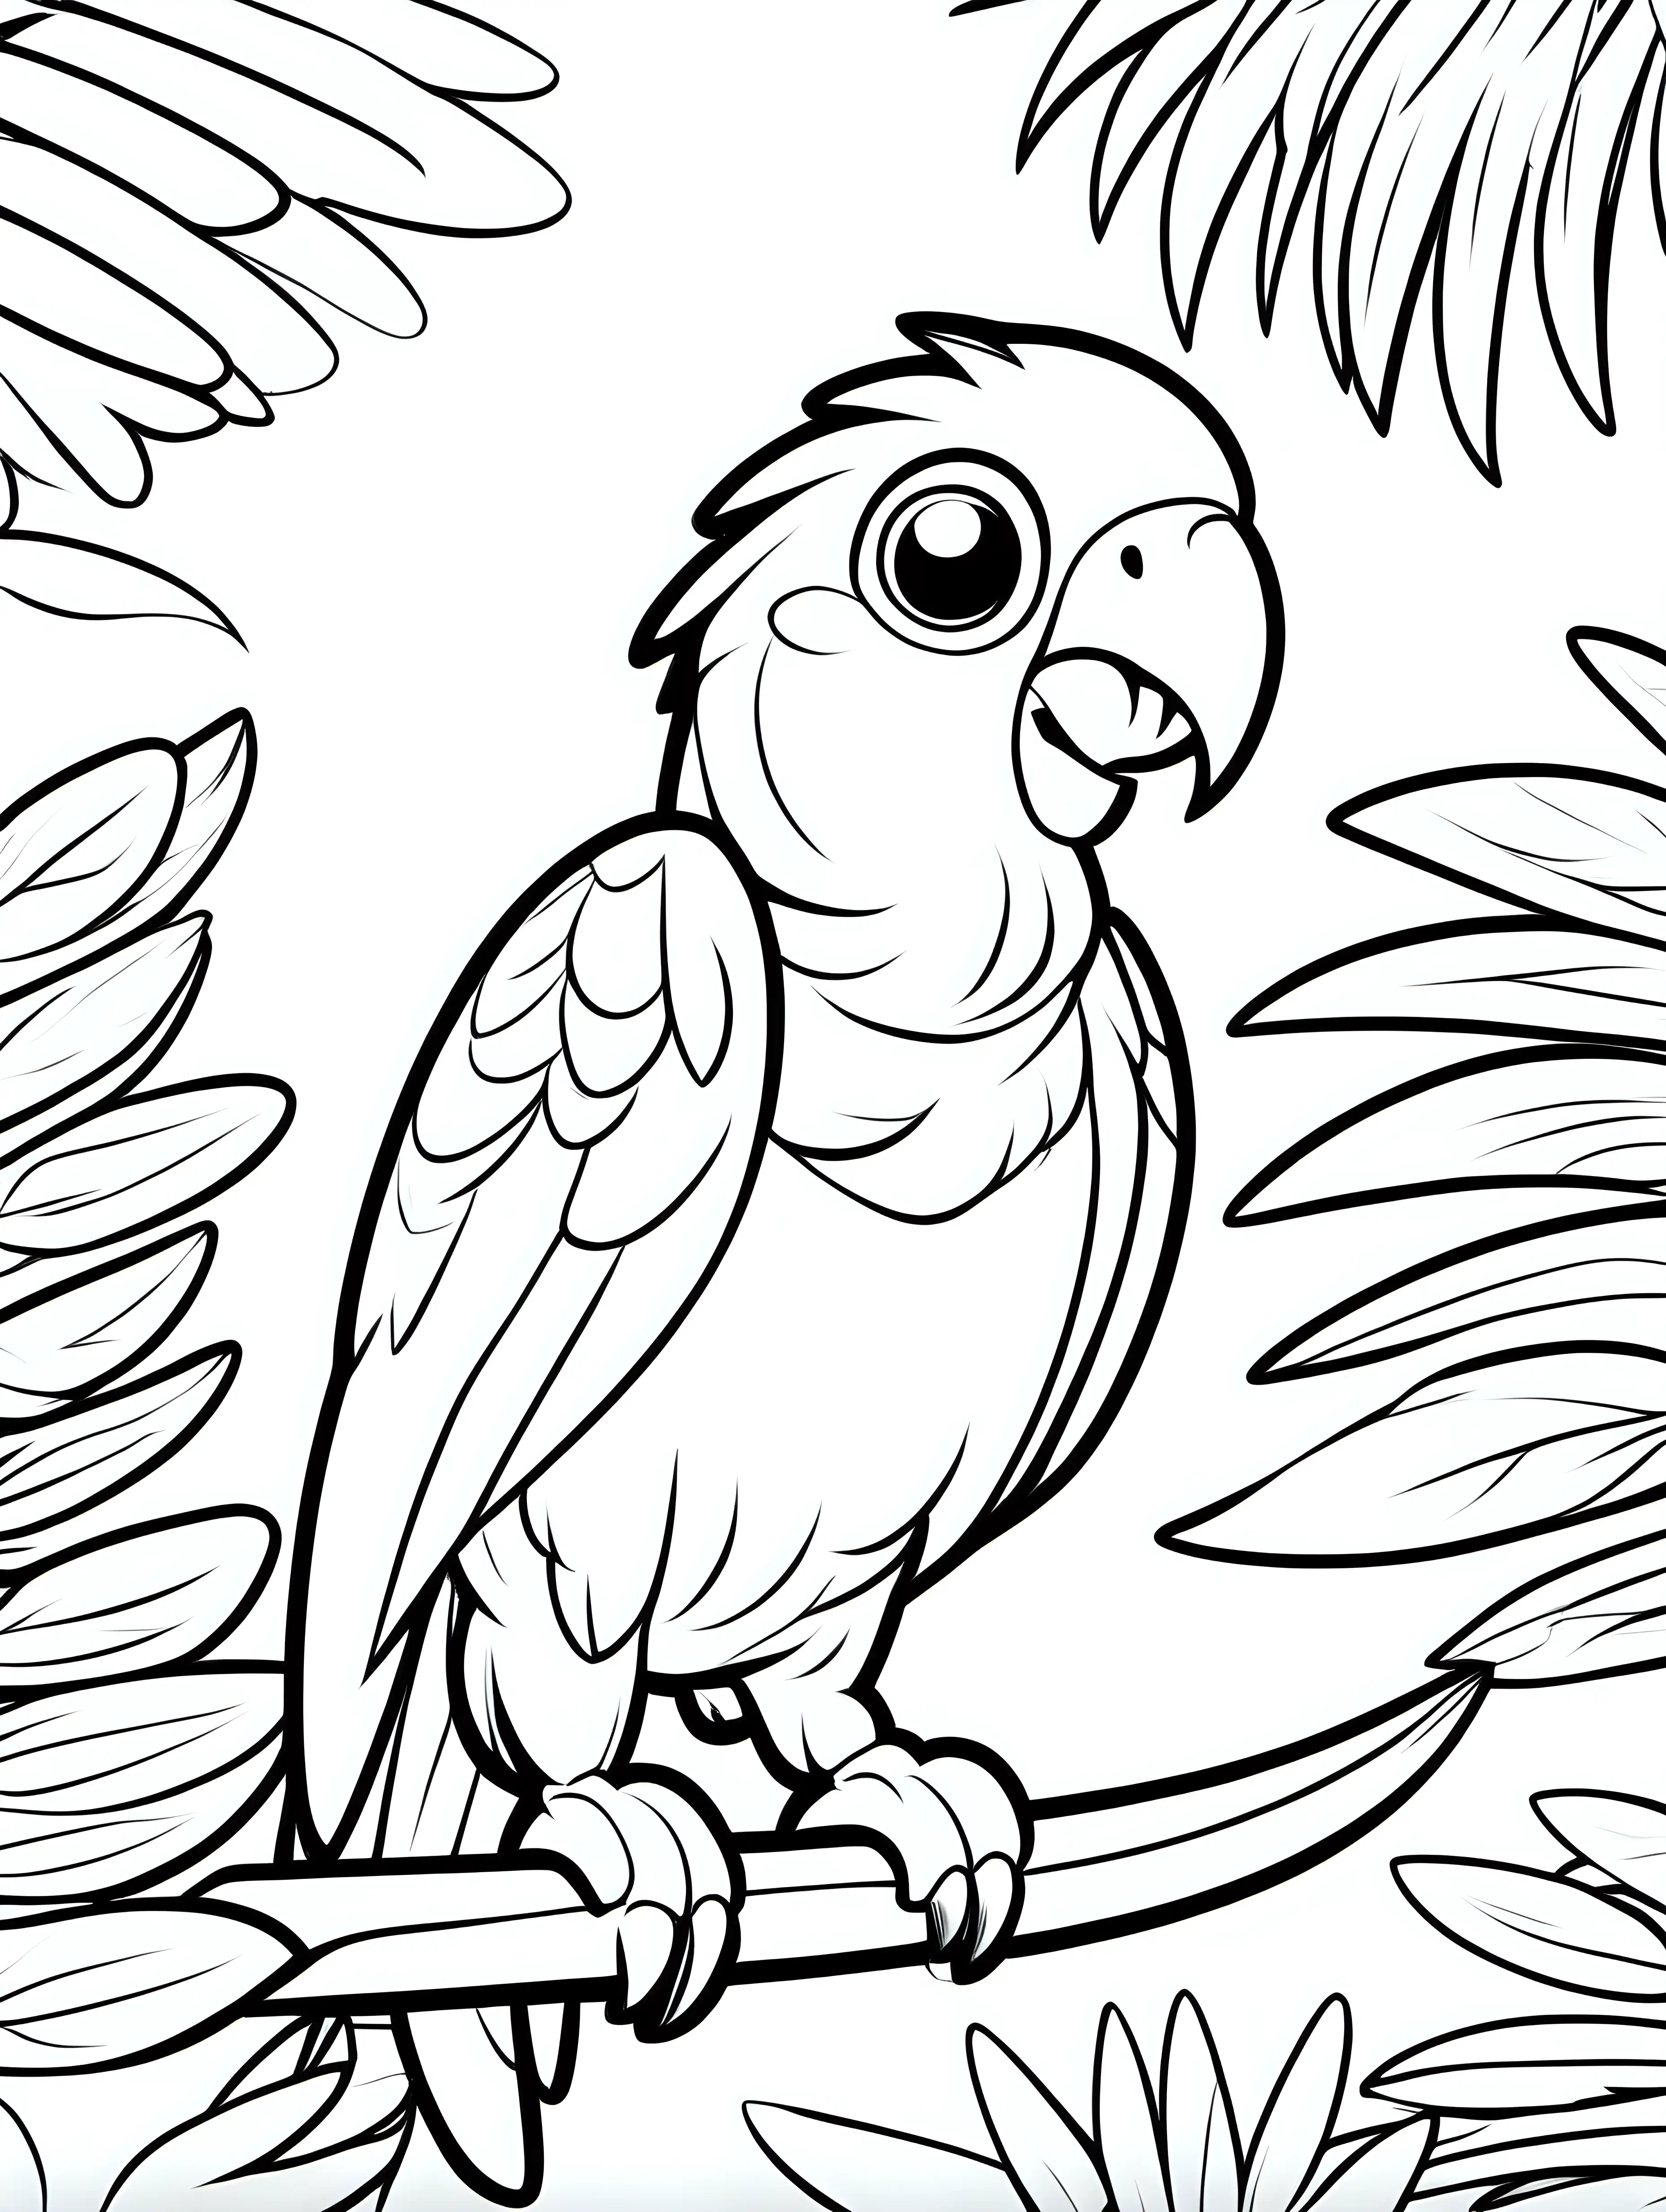 Coloring book, cartoon drawing, clean black and white, single line, in center of aspect ratio 9:16, white background, cute parrot chick perched on a tree with vibrant feathers.